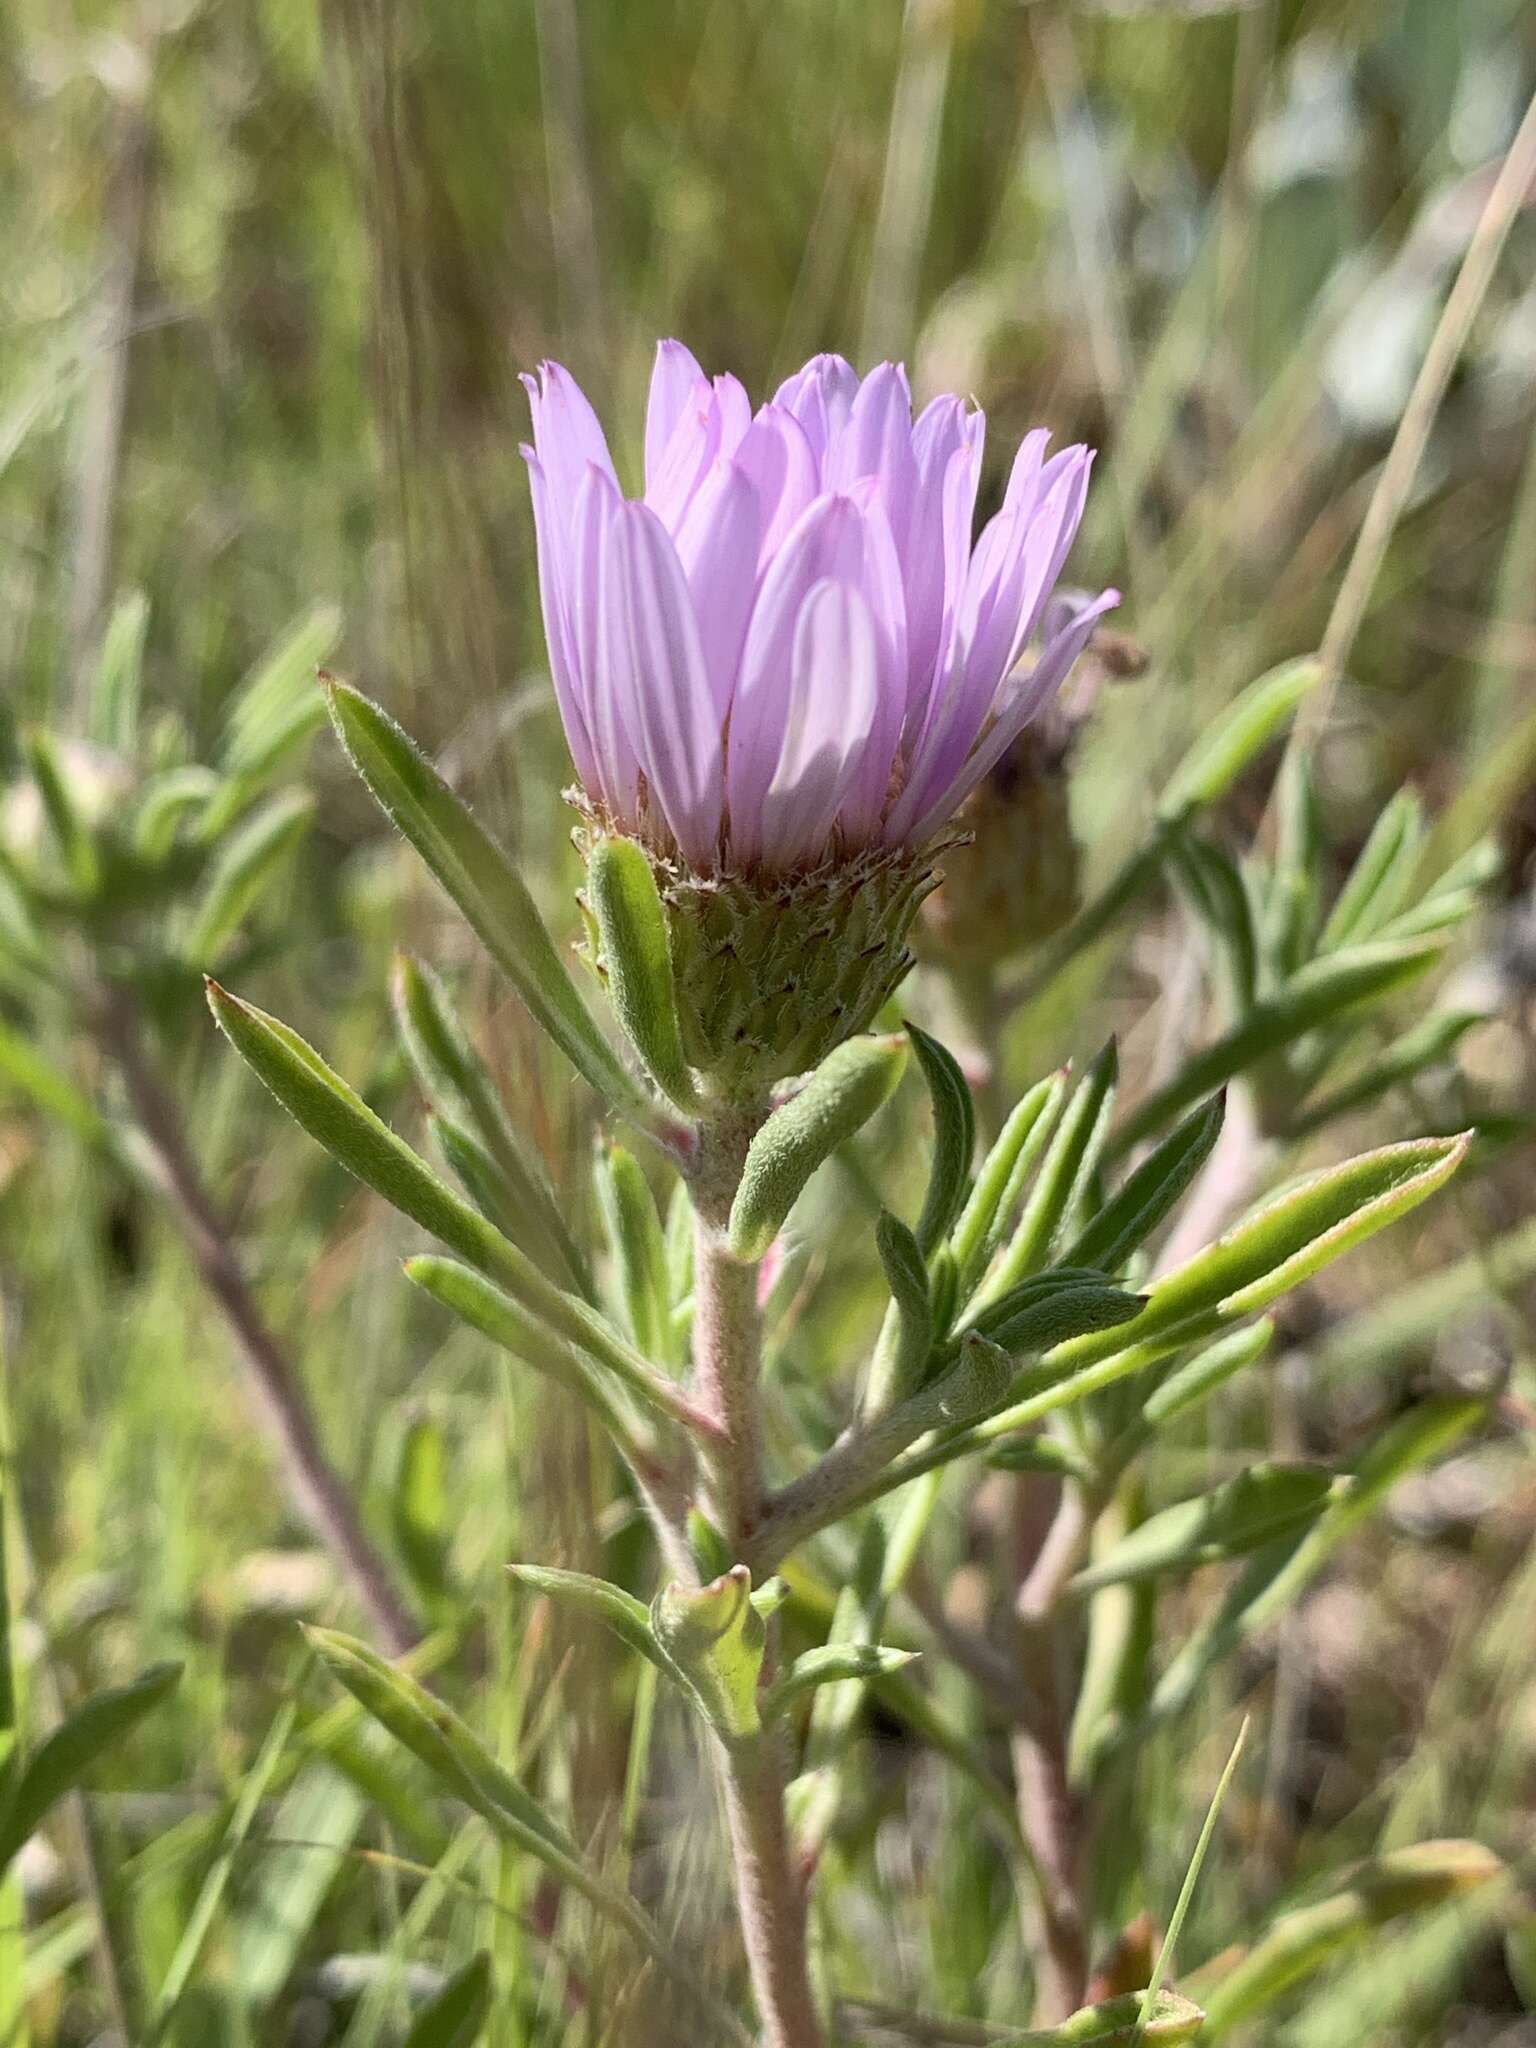 Image of Texas Townsend daisy